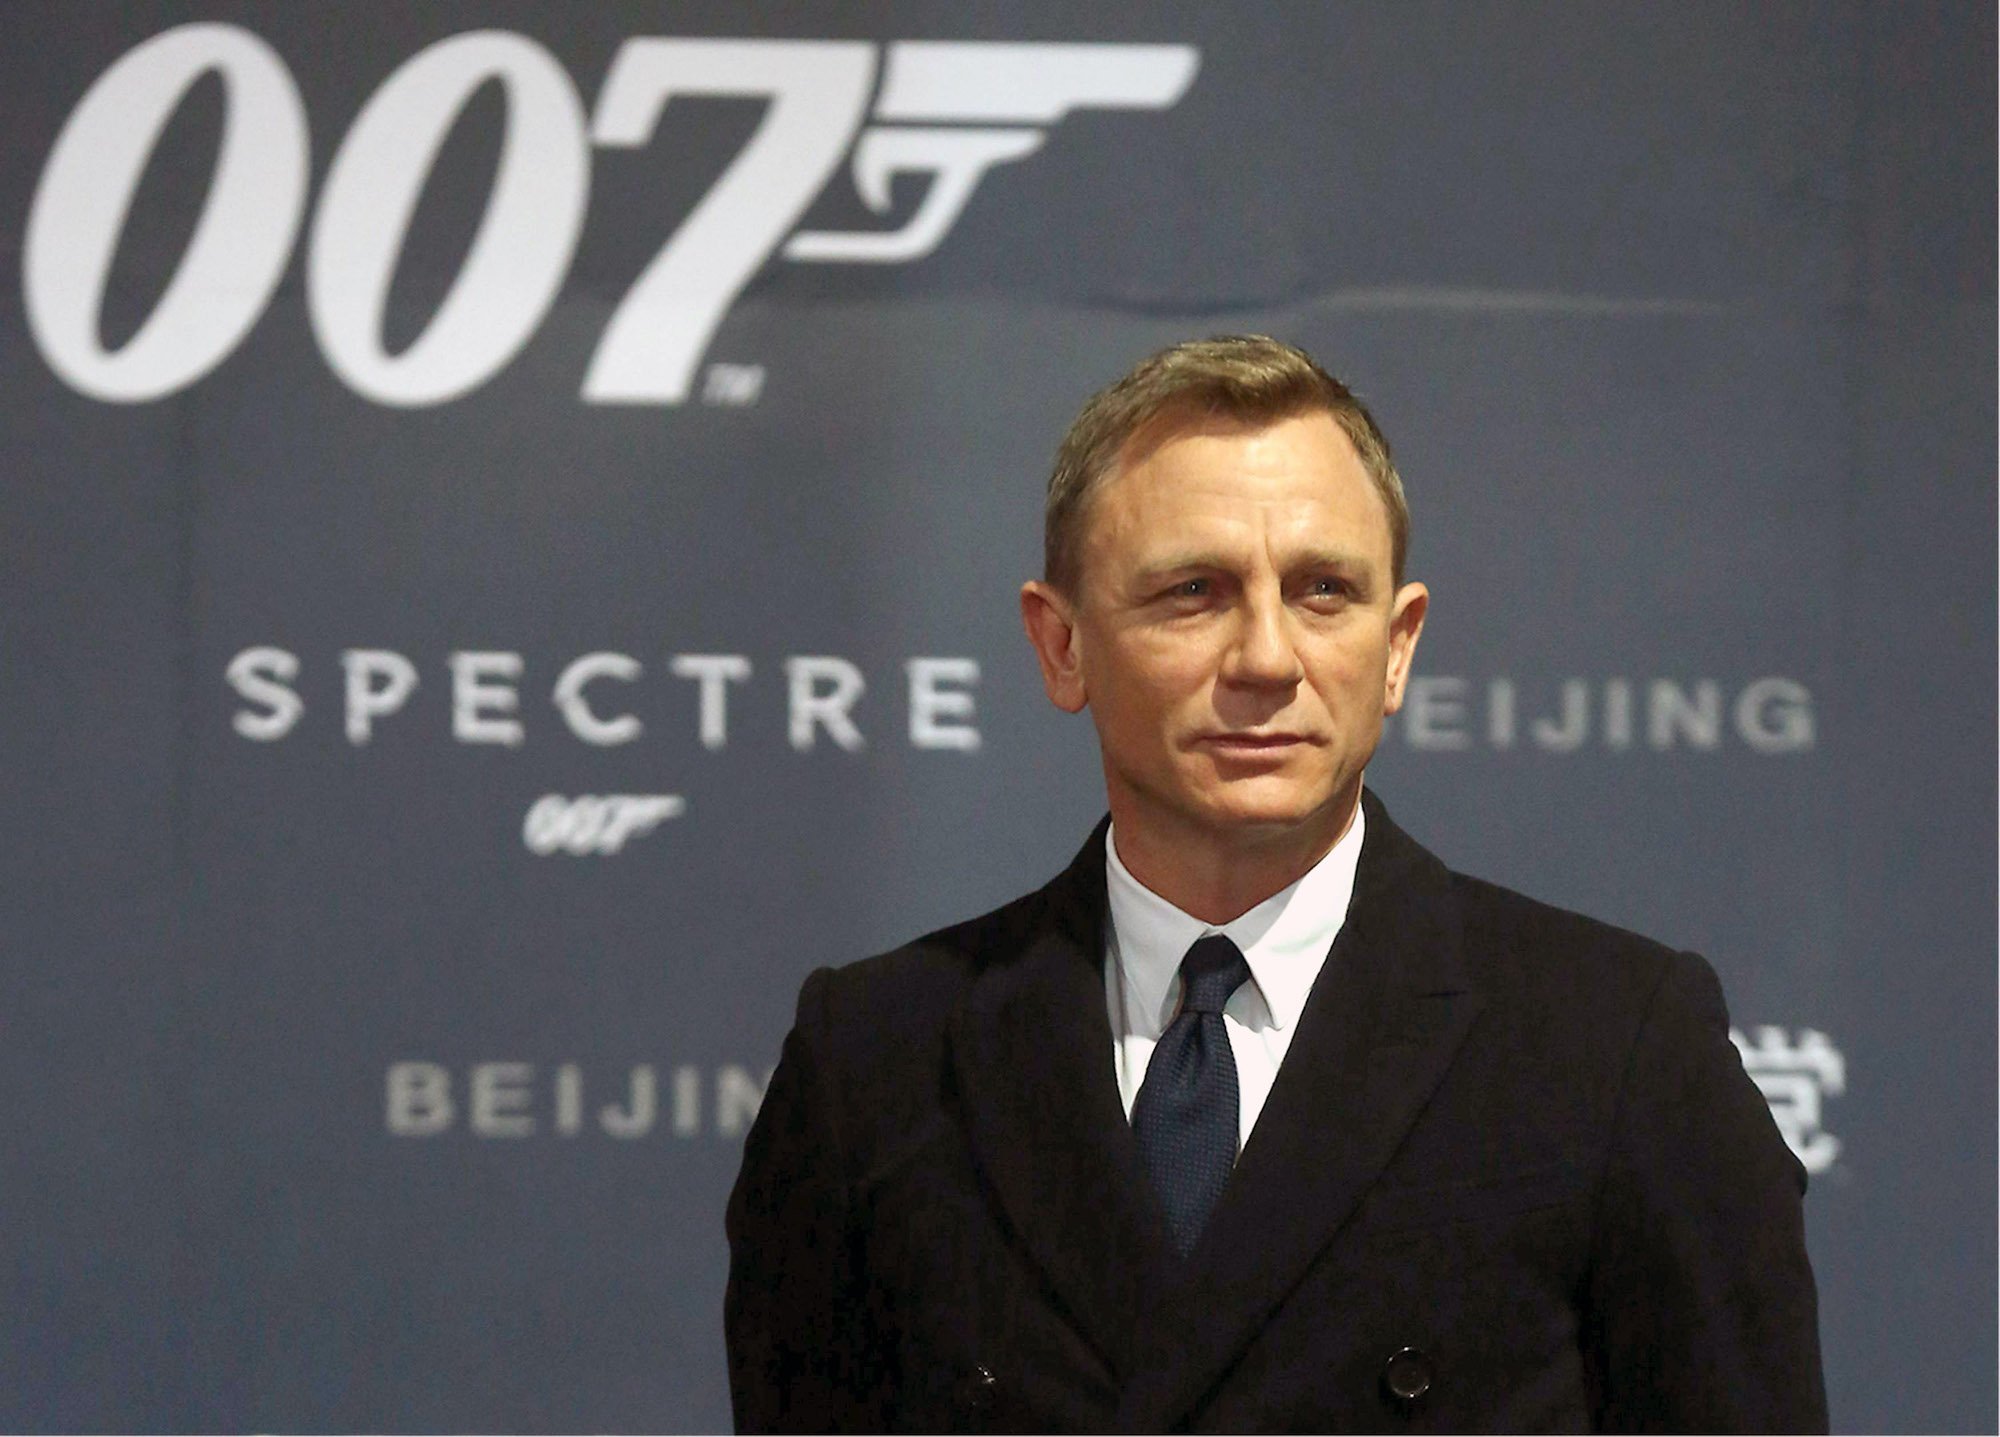 Actor Daniel Craig attends 'Spectre' premiere at The Place on November 12, 2015 in Beijing, China. He will reprise his role as James Bond in 'No TIme to Die'